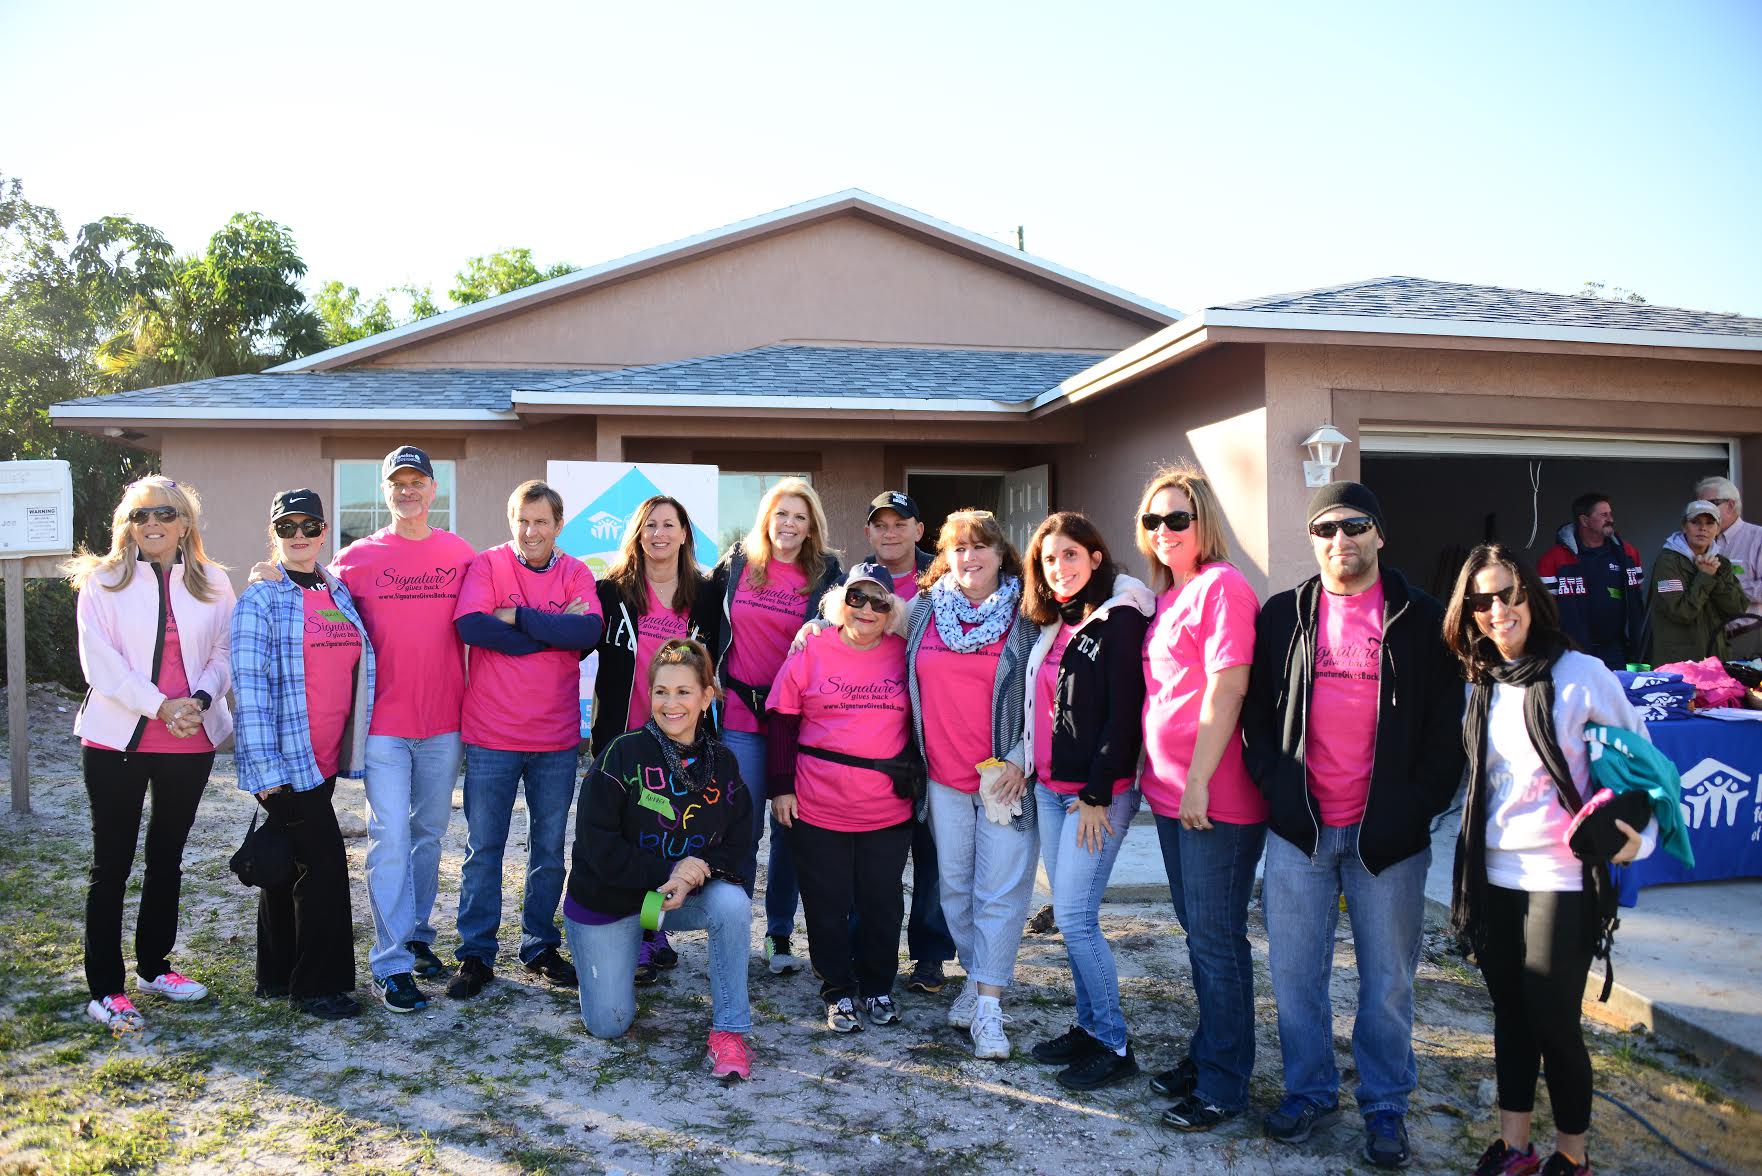 Signature Gives Back volunteering for Habitat for Humanity